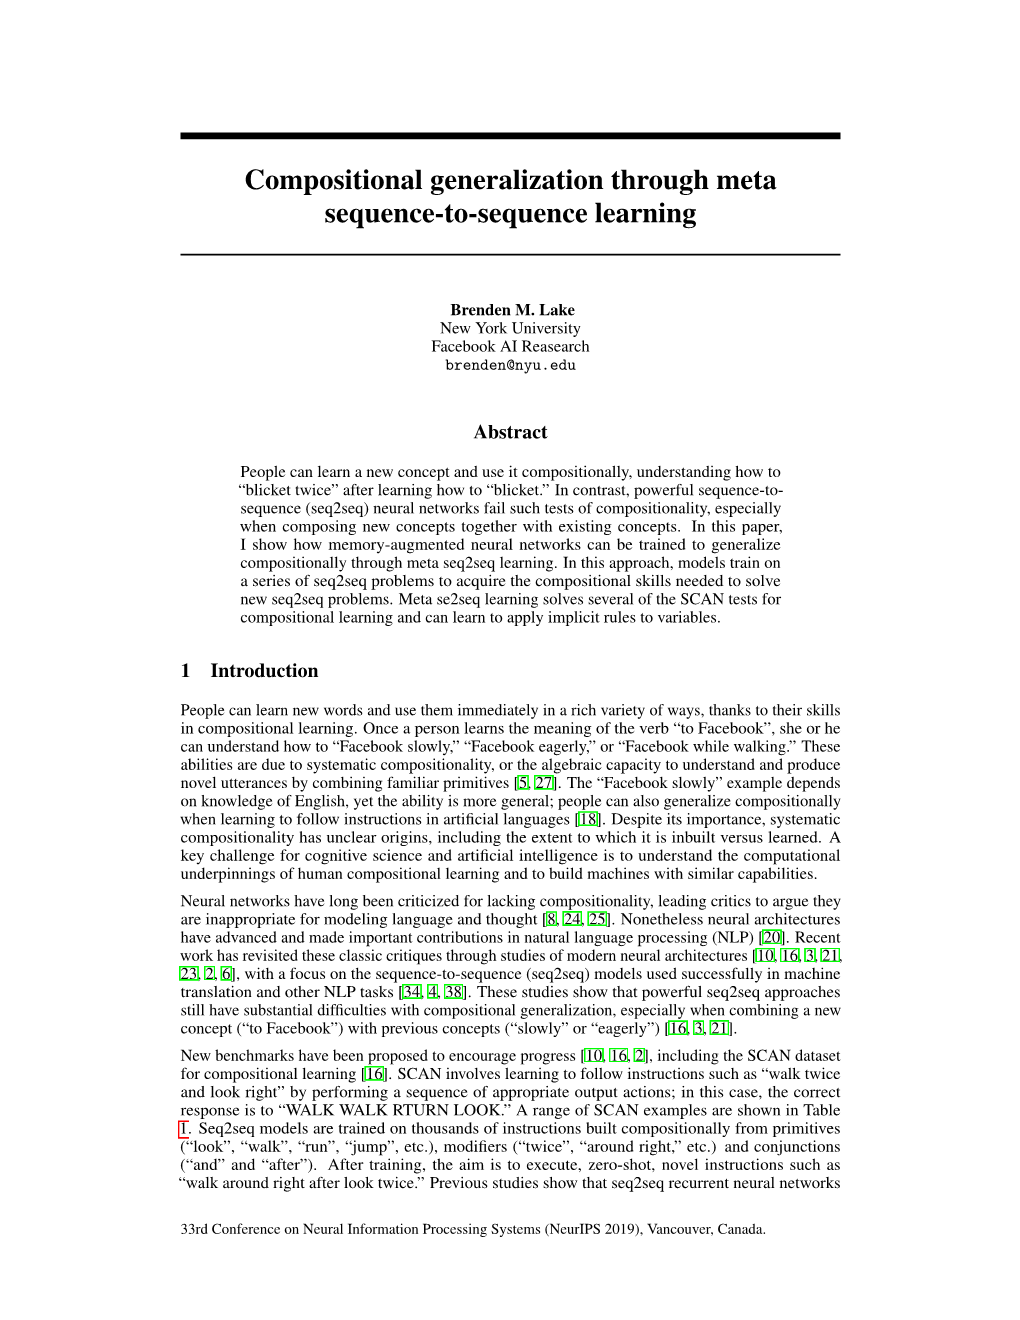 Compositional Generalization Through Meta Sequence-To-Sequence Learning